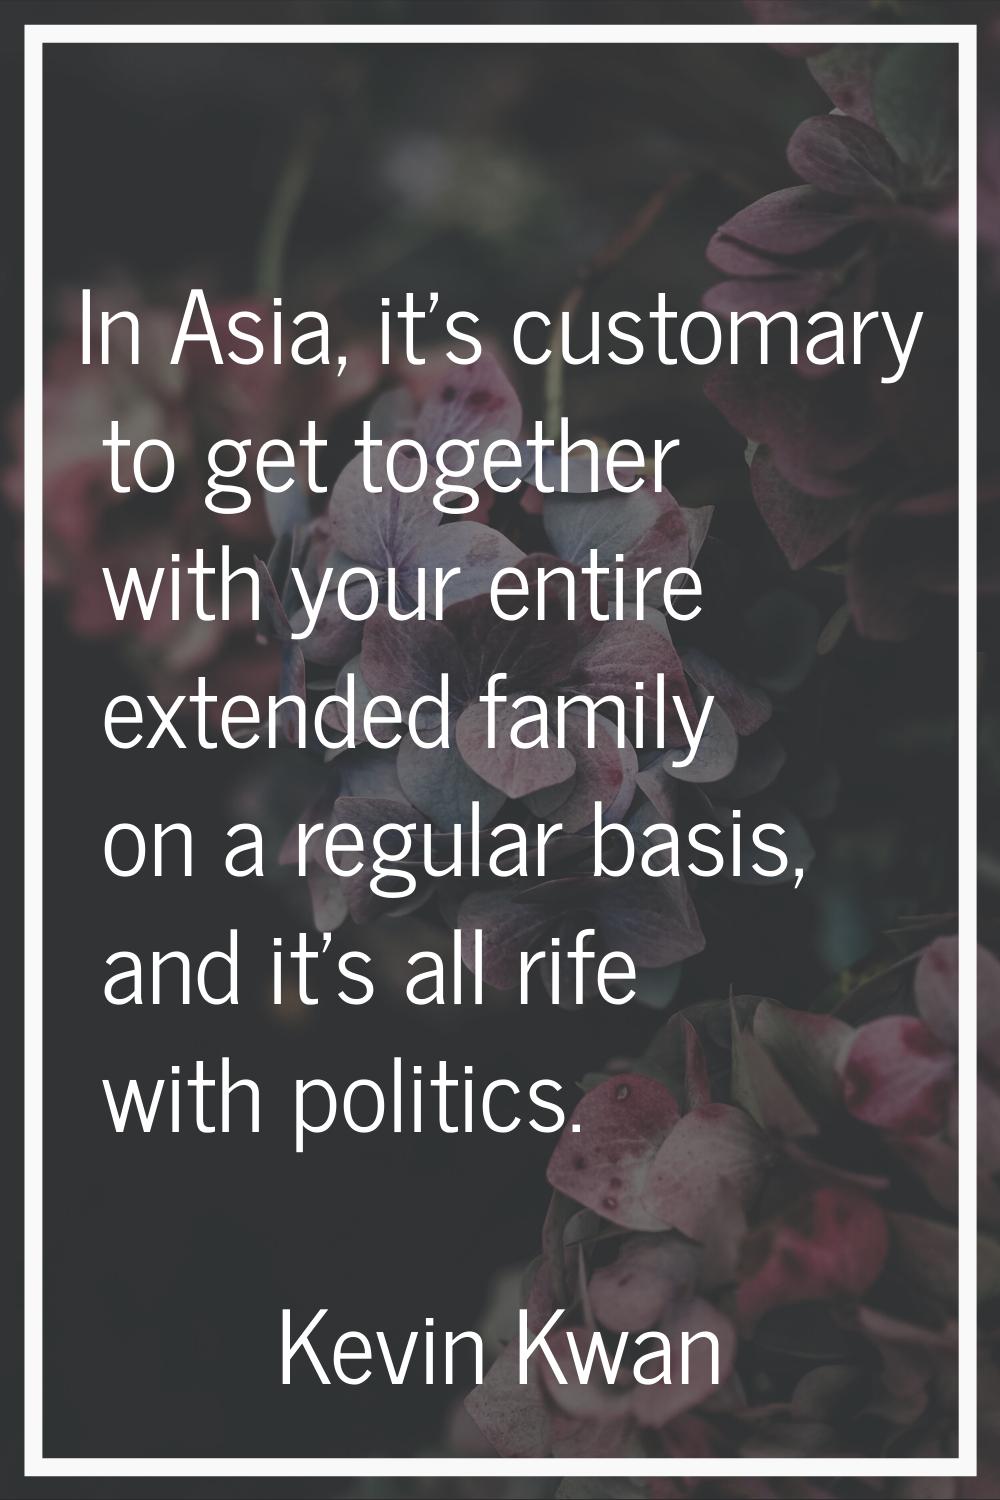 In Asia, it's customary to get together with your entire extended family on a regular basis, and it